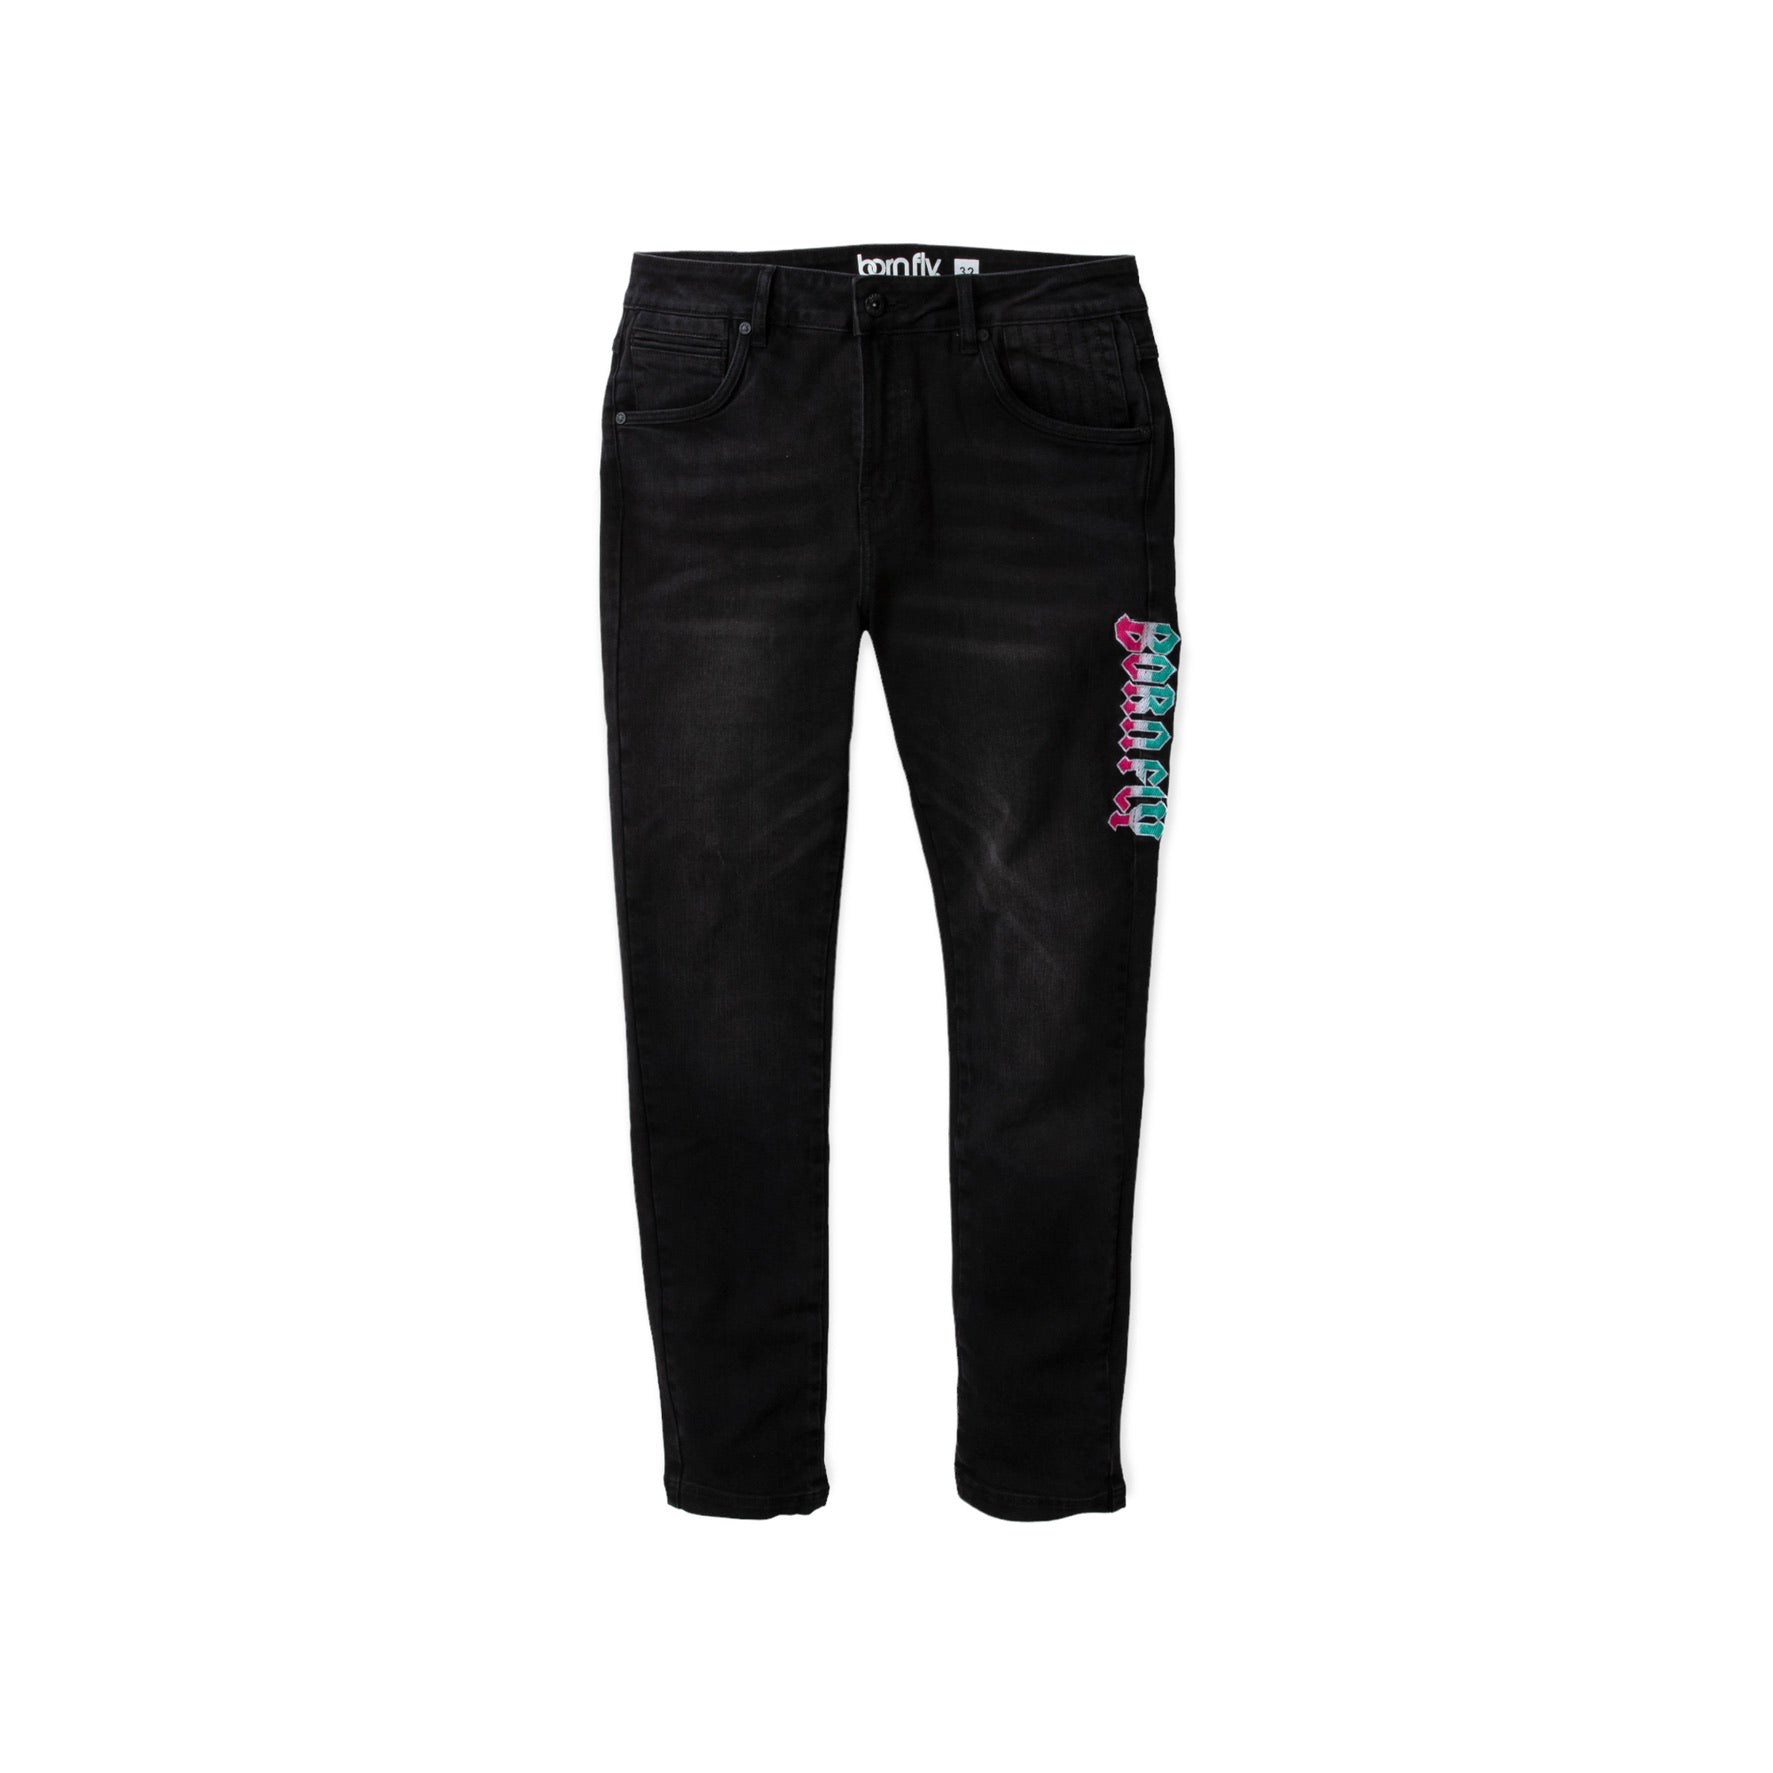 BORN FLY: Unstoppable Fly Denim Jean 2209D4469